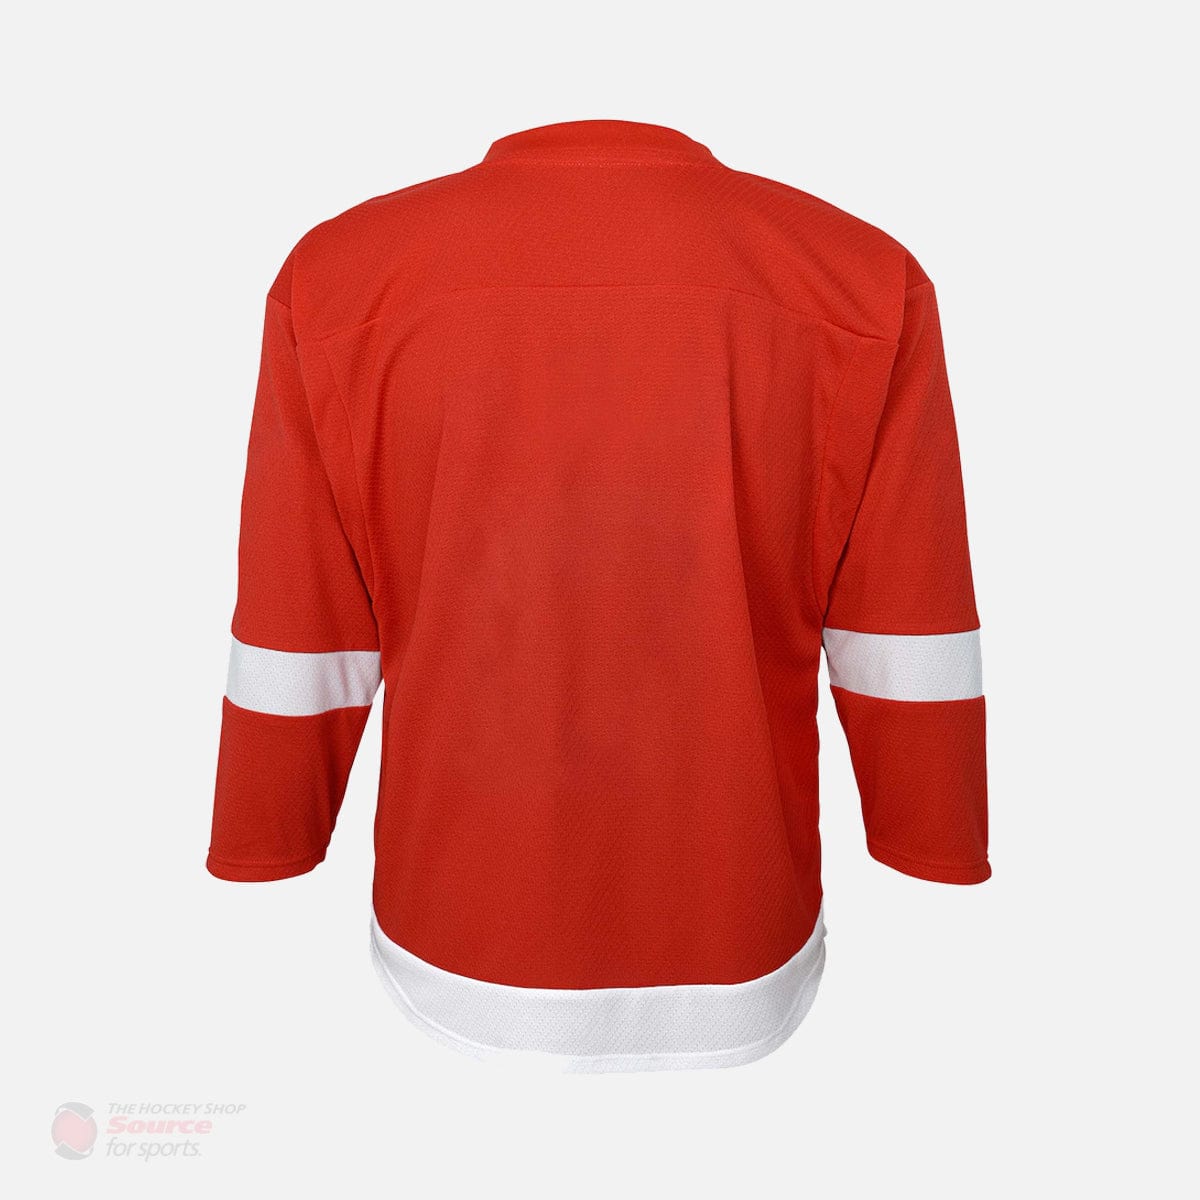 Detroit Red Wings Home Outer Stuff Replica Junior Jersey